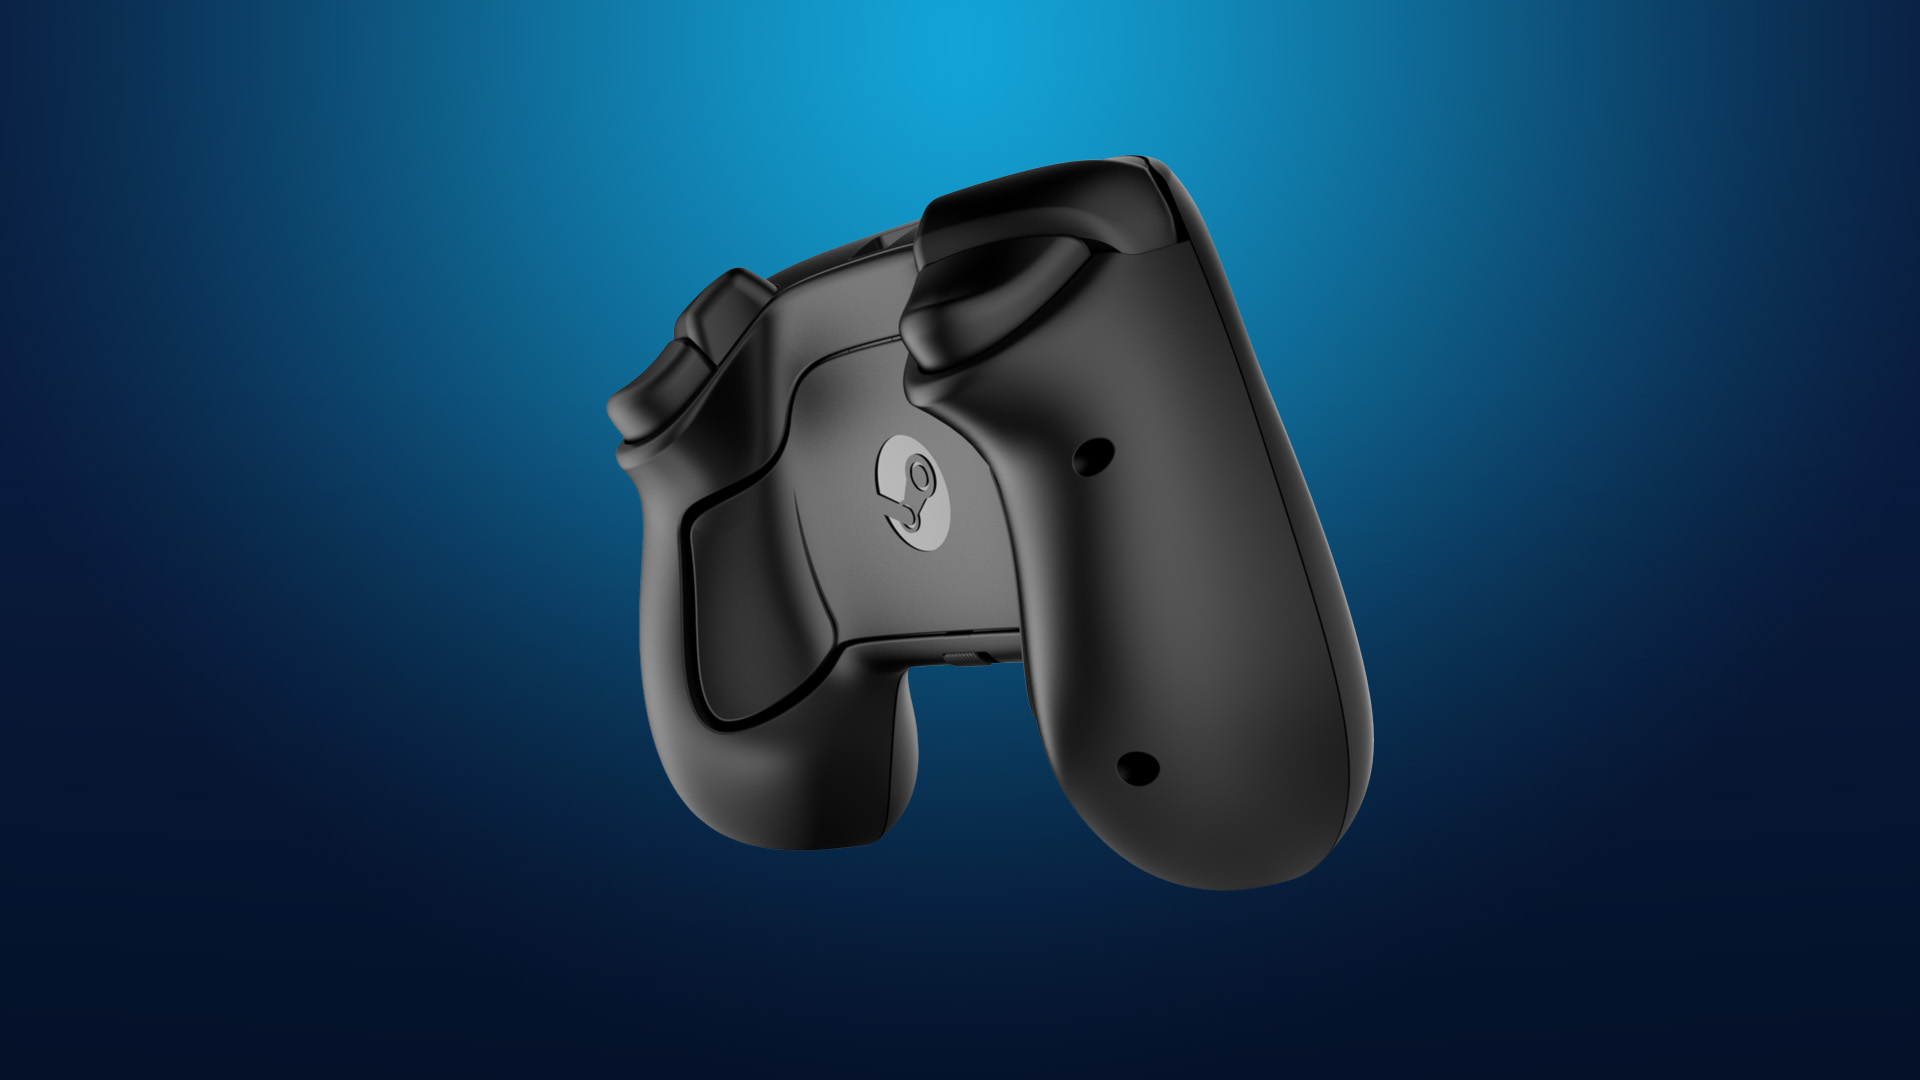 pairing-steam-controller-with-your-dongle-easily